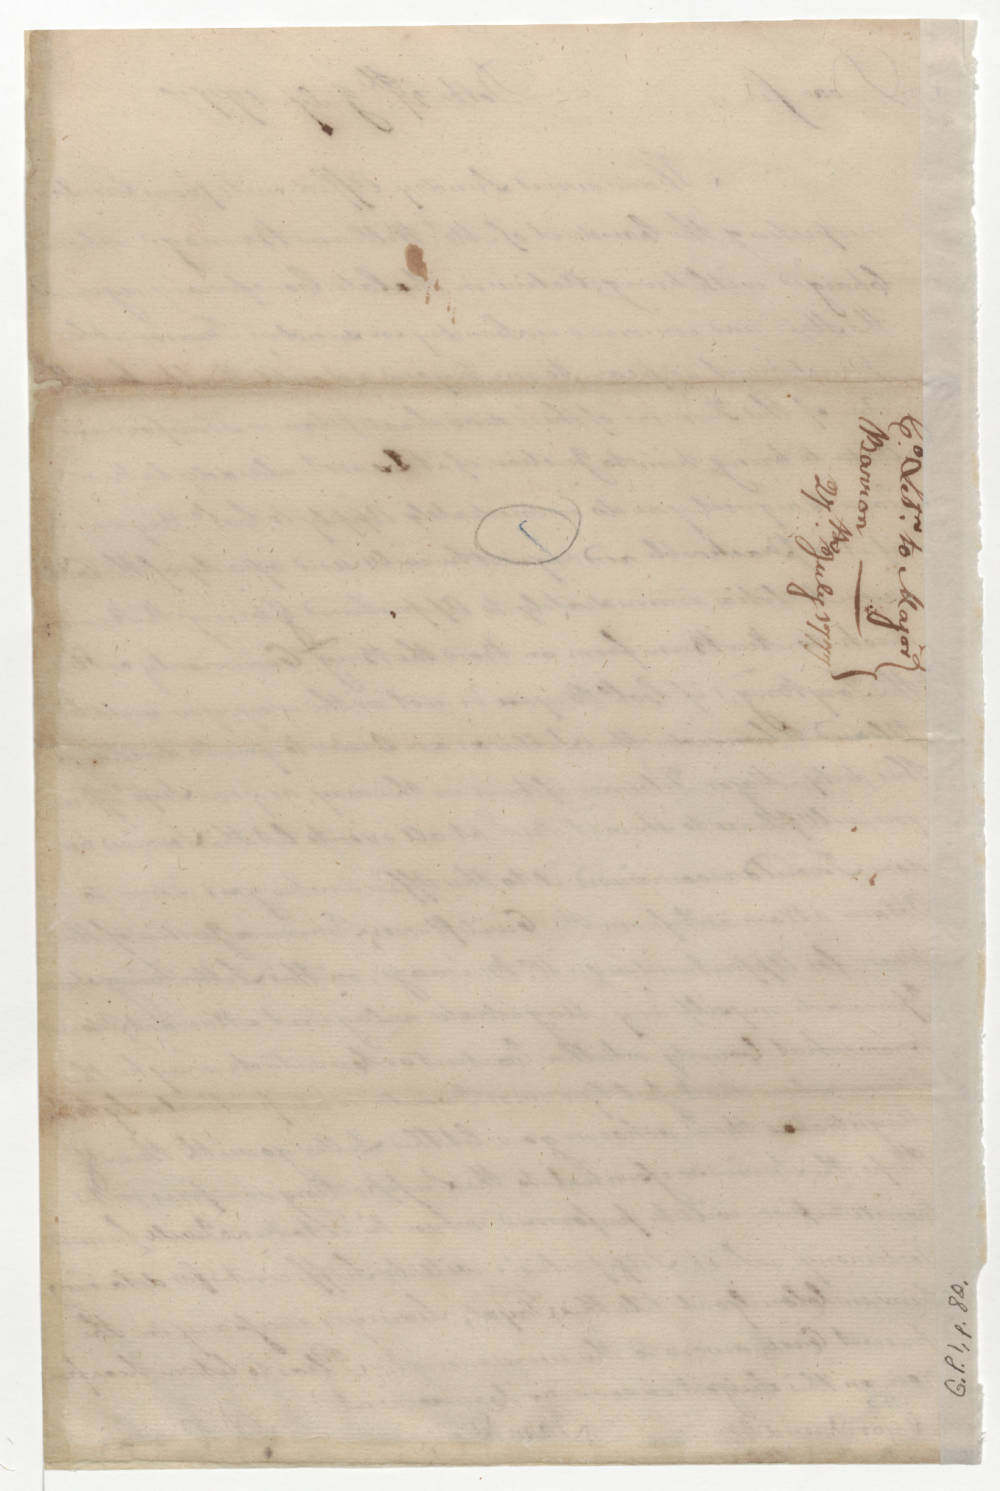 Letter from Richard Caswell to David Barron, 27 July 1777, page 2